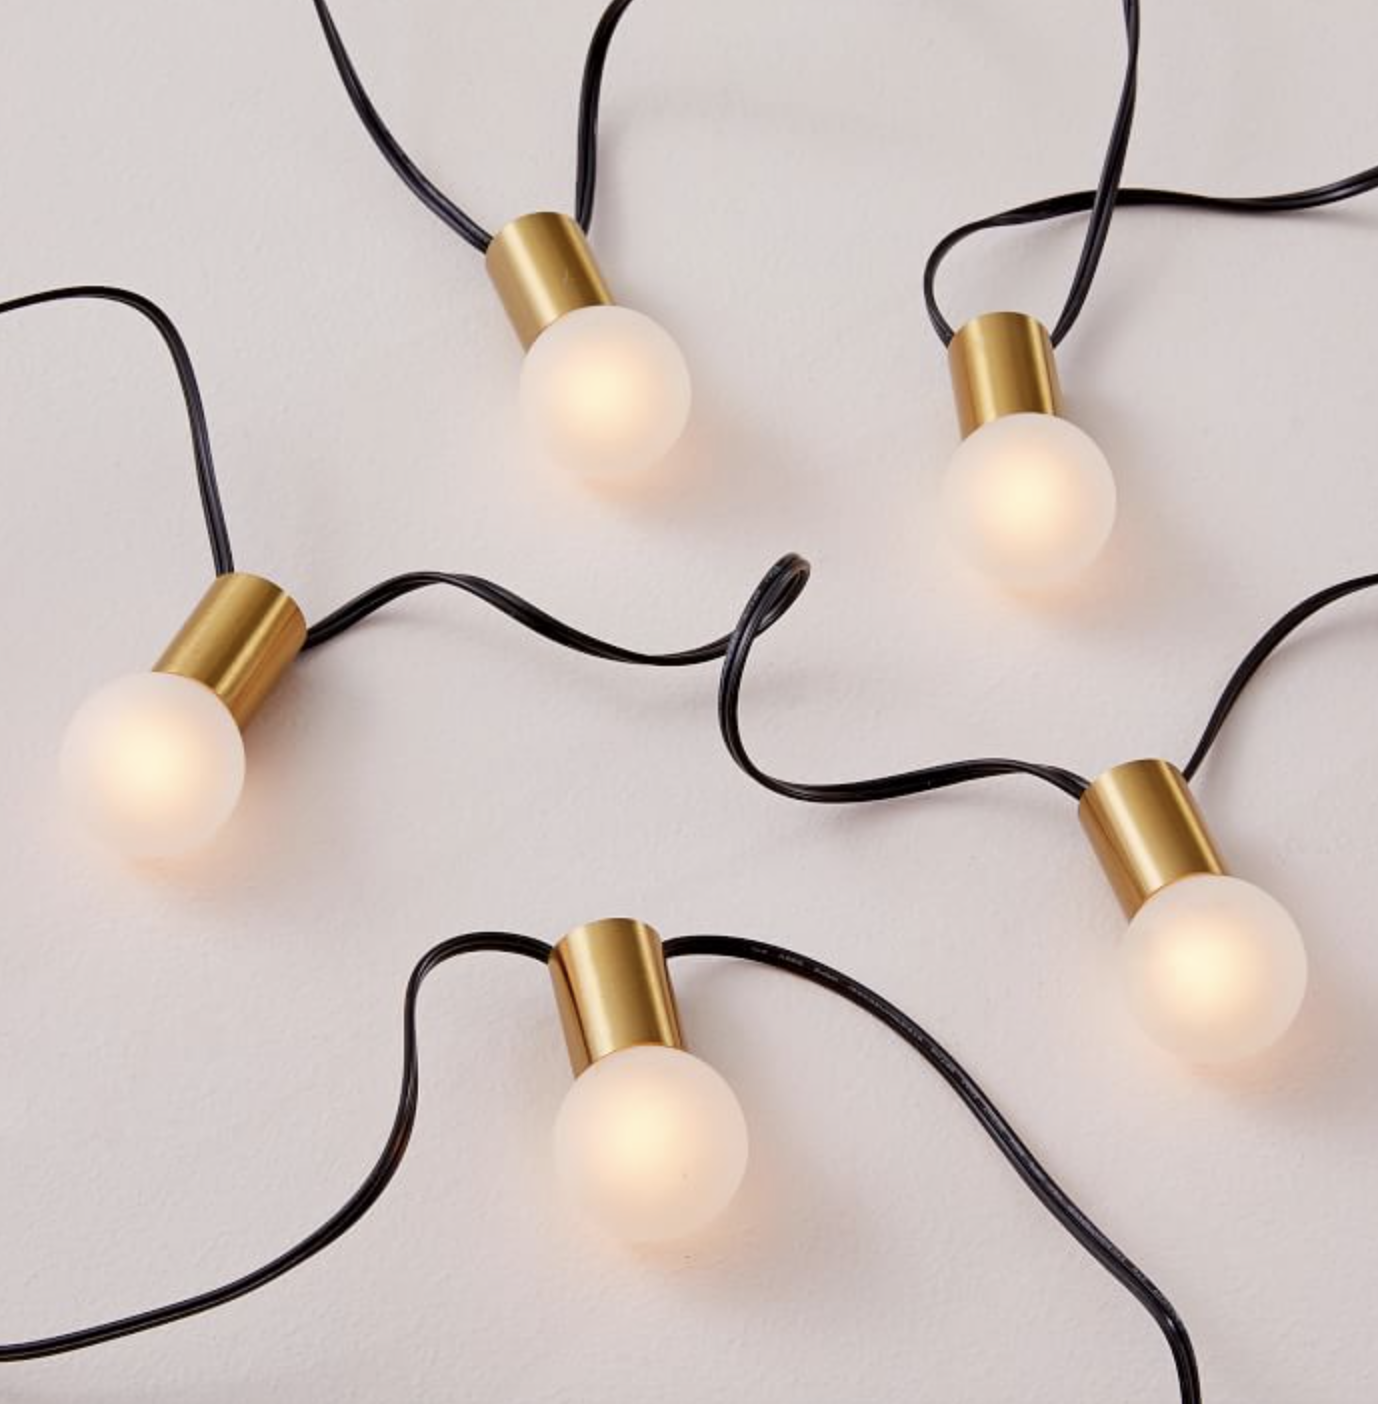 10 Best String Lights For Bedrooms, Best Outdoor Battery Operated String Lights